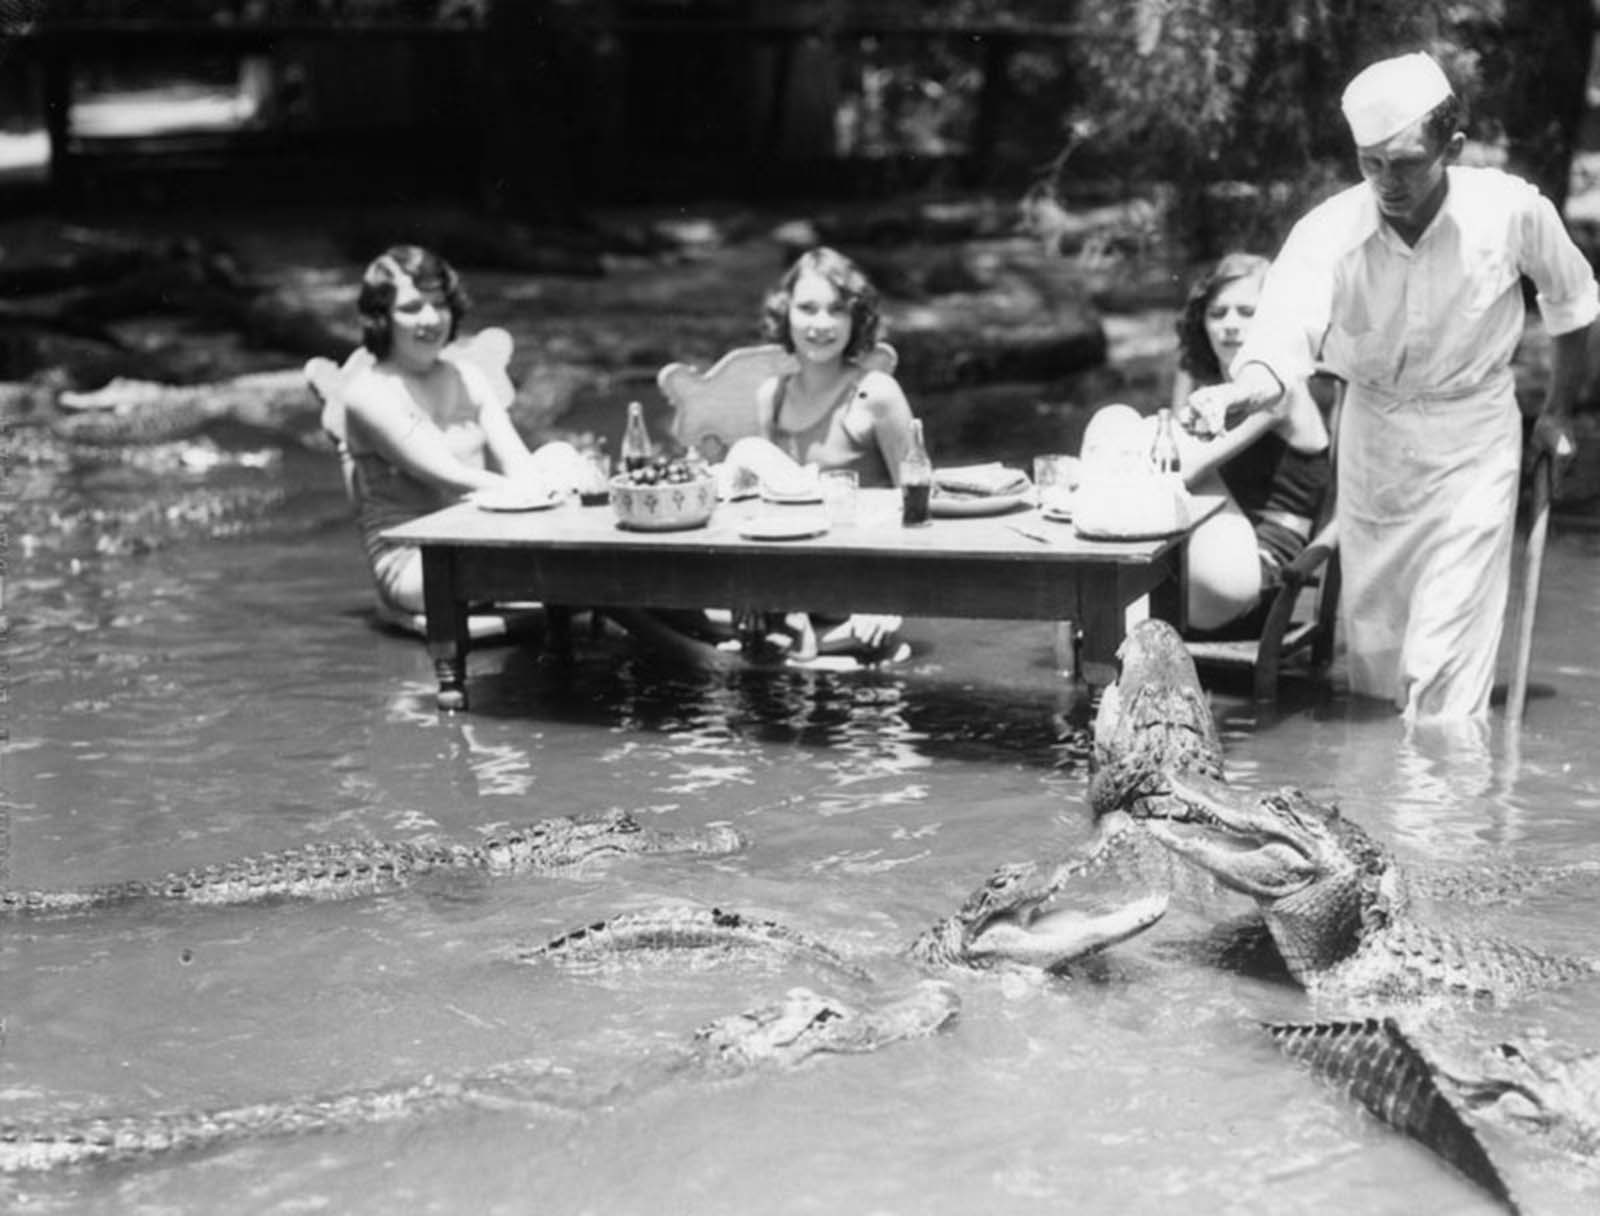 In the unregulated park, people encountered alligators without fences, gates or grates.